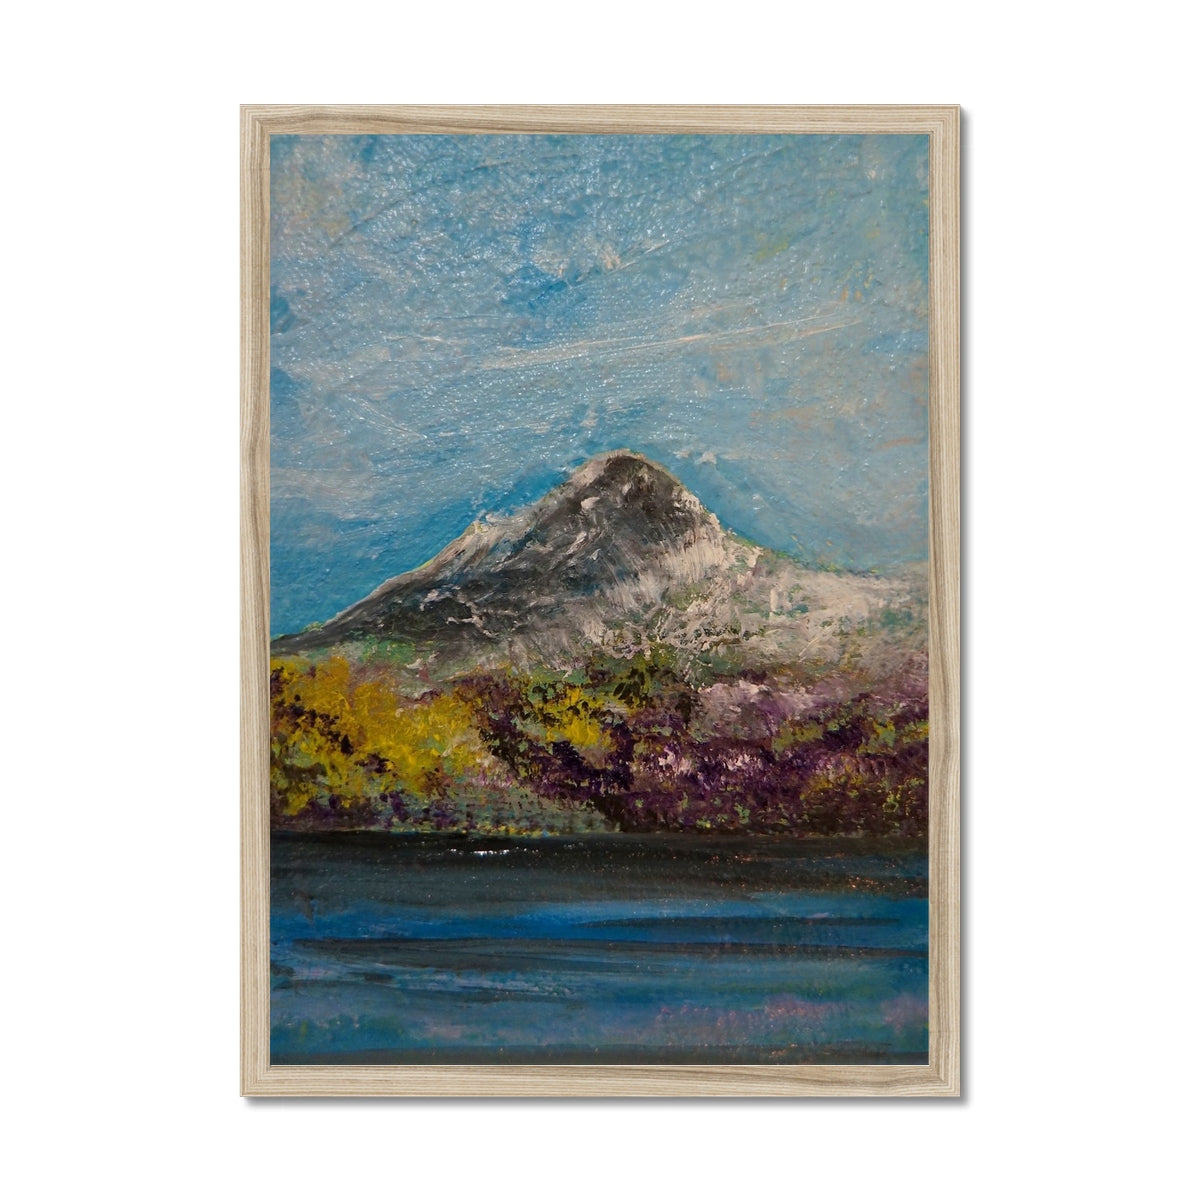 Ben Lomond ii Painting | Framed Prints From Scotland-Framed Prints-Scottish Lochs & Mountains Art Gallery-A2 Portrait-Natural Frame-Paintings, Prints, Homeware, Art Gifts From Scotland By Scottish Artist Kevin Hunter